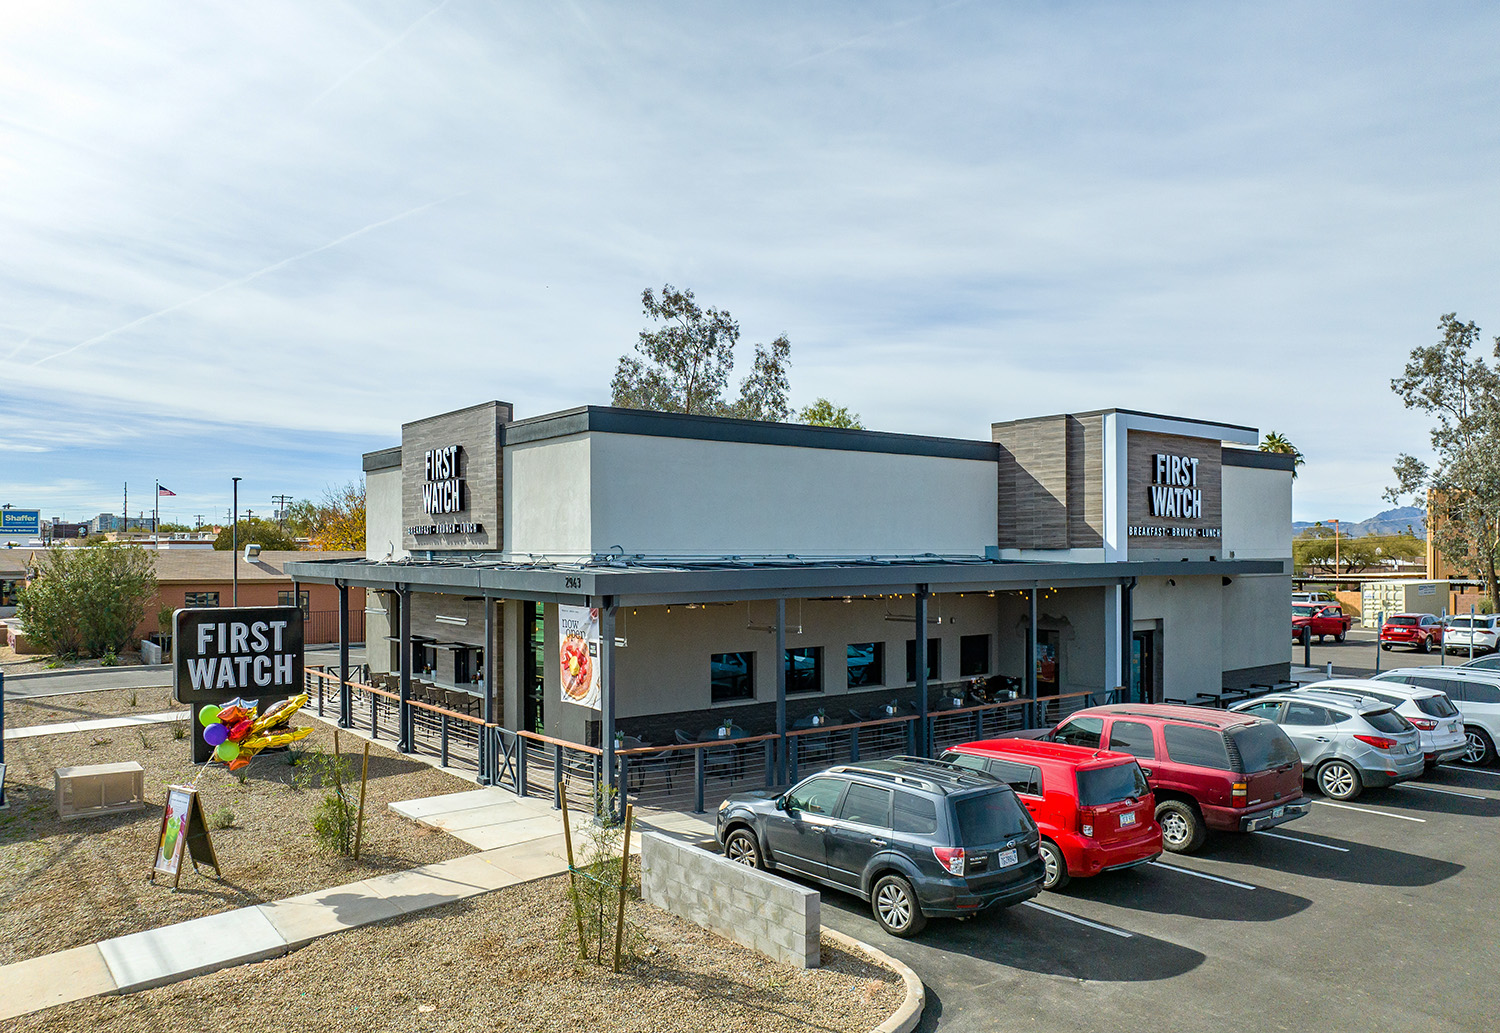 Hanley Investment Arranges $4 Million Sale of New Single-Tenant First Watch Restaurant in Tucson, Ariz., to Southern California Buyer 